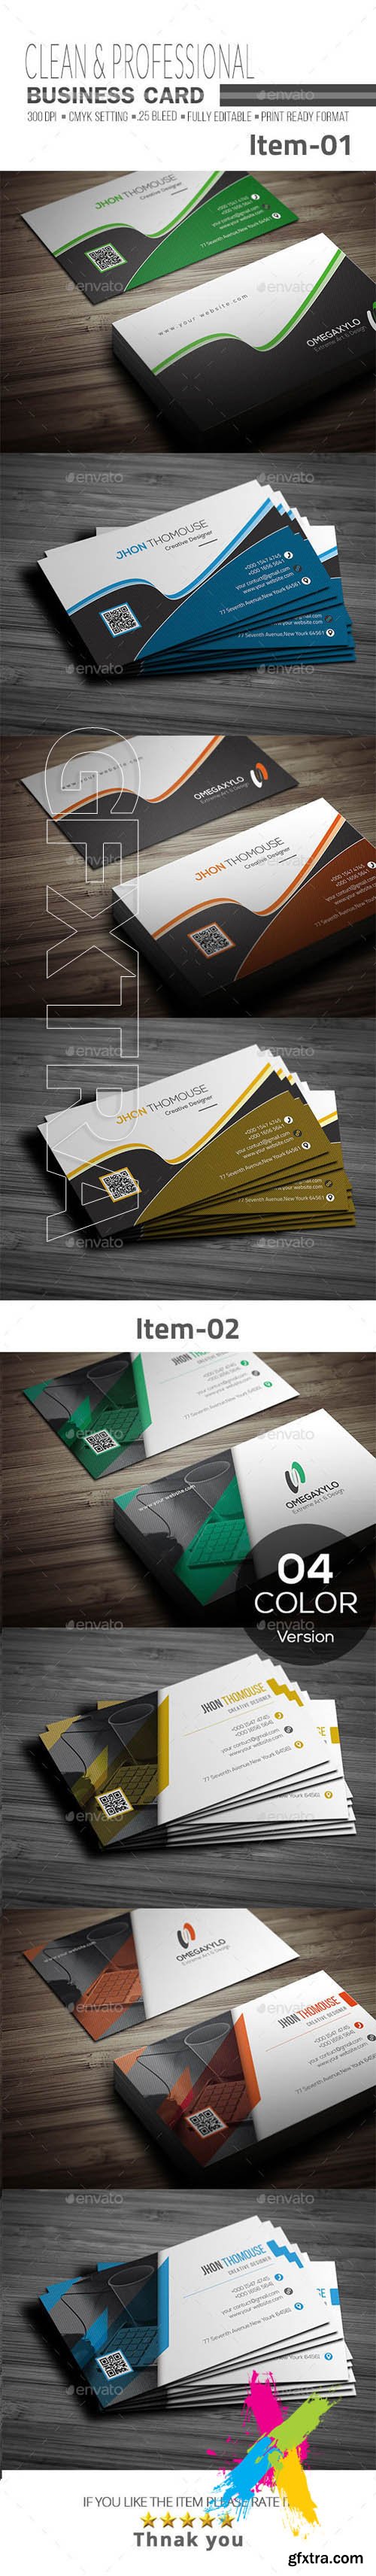 GraphicRiver - Business Card Bundle 2 In 1 20568289